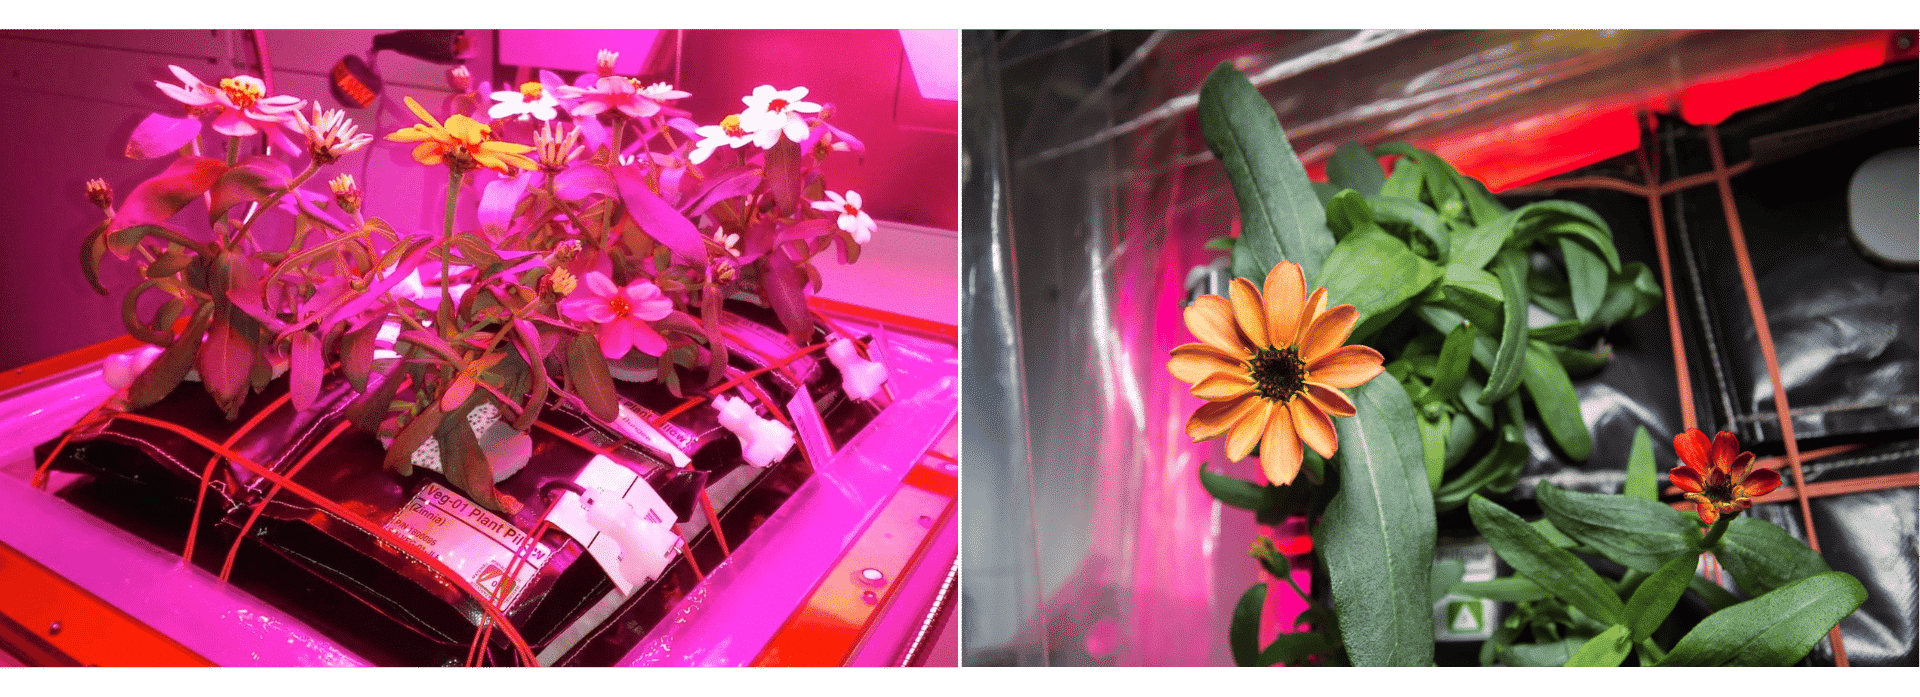 Right Image: Zinnias blossoming from VEG-01 plant pillows / Left Image: Zinnias bloom aboard the ISS